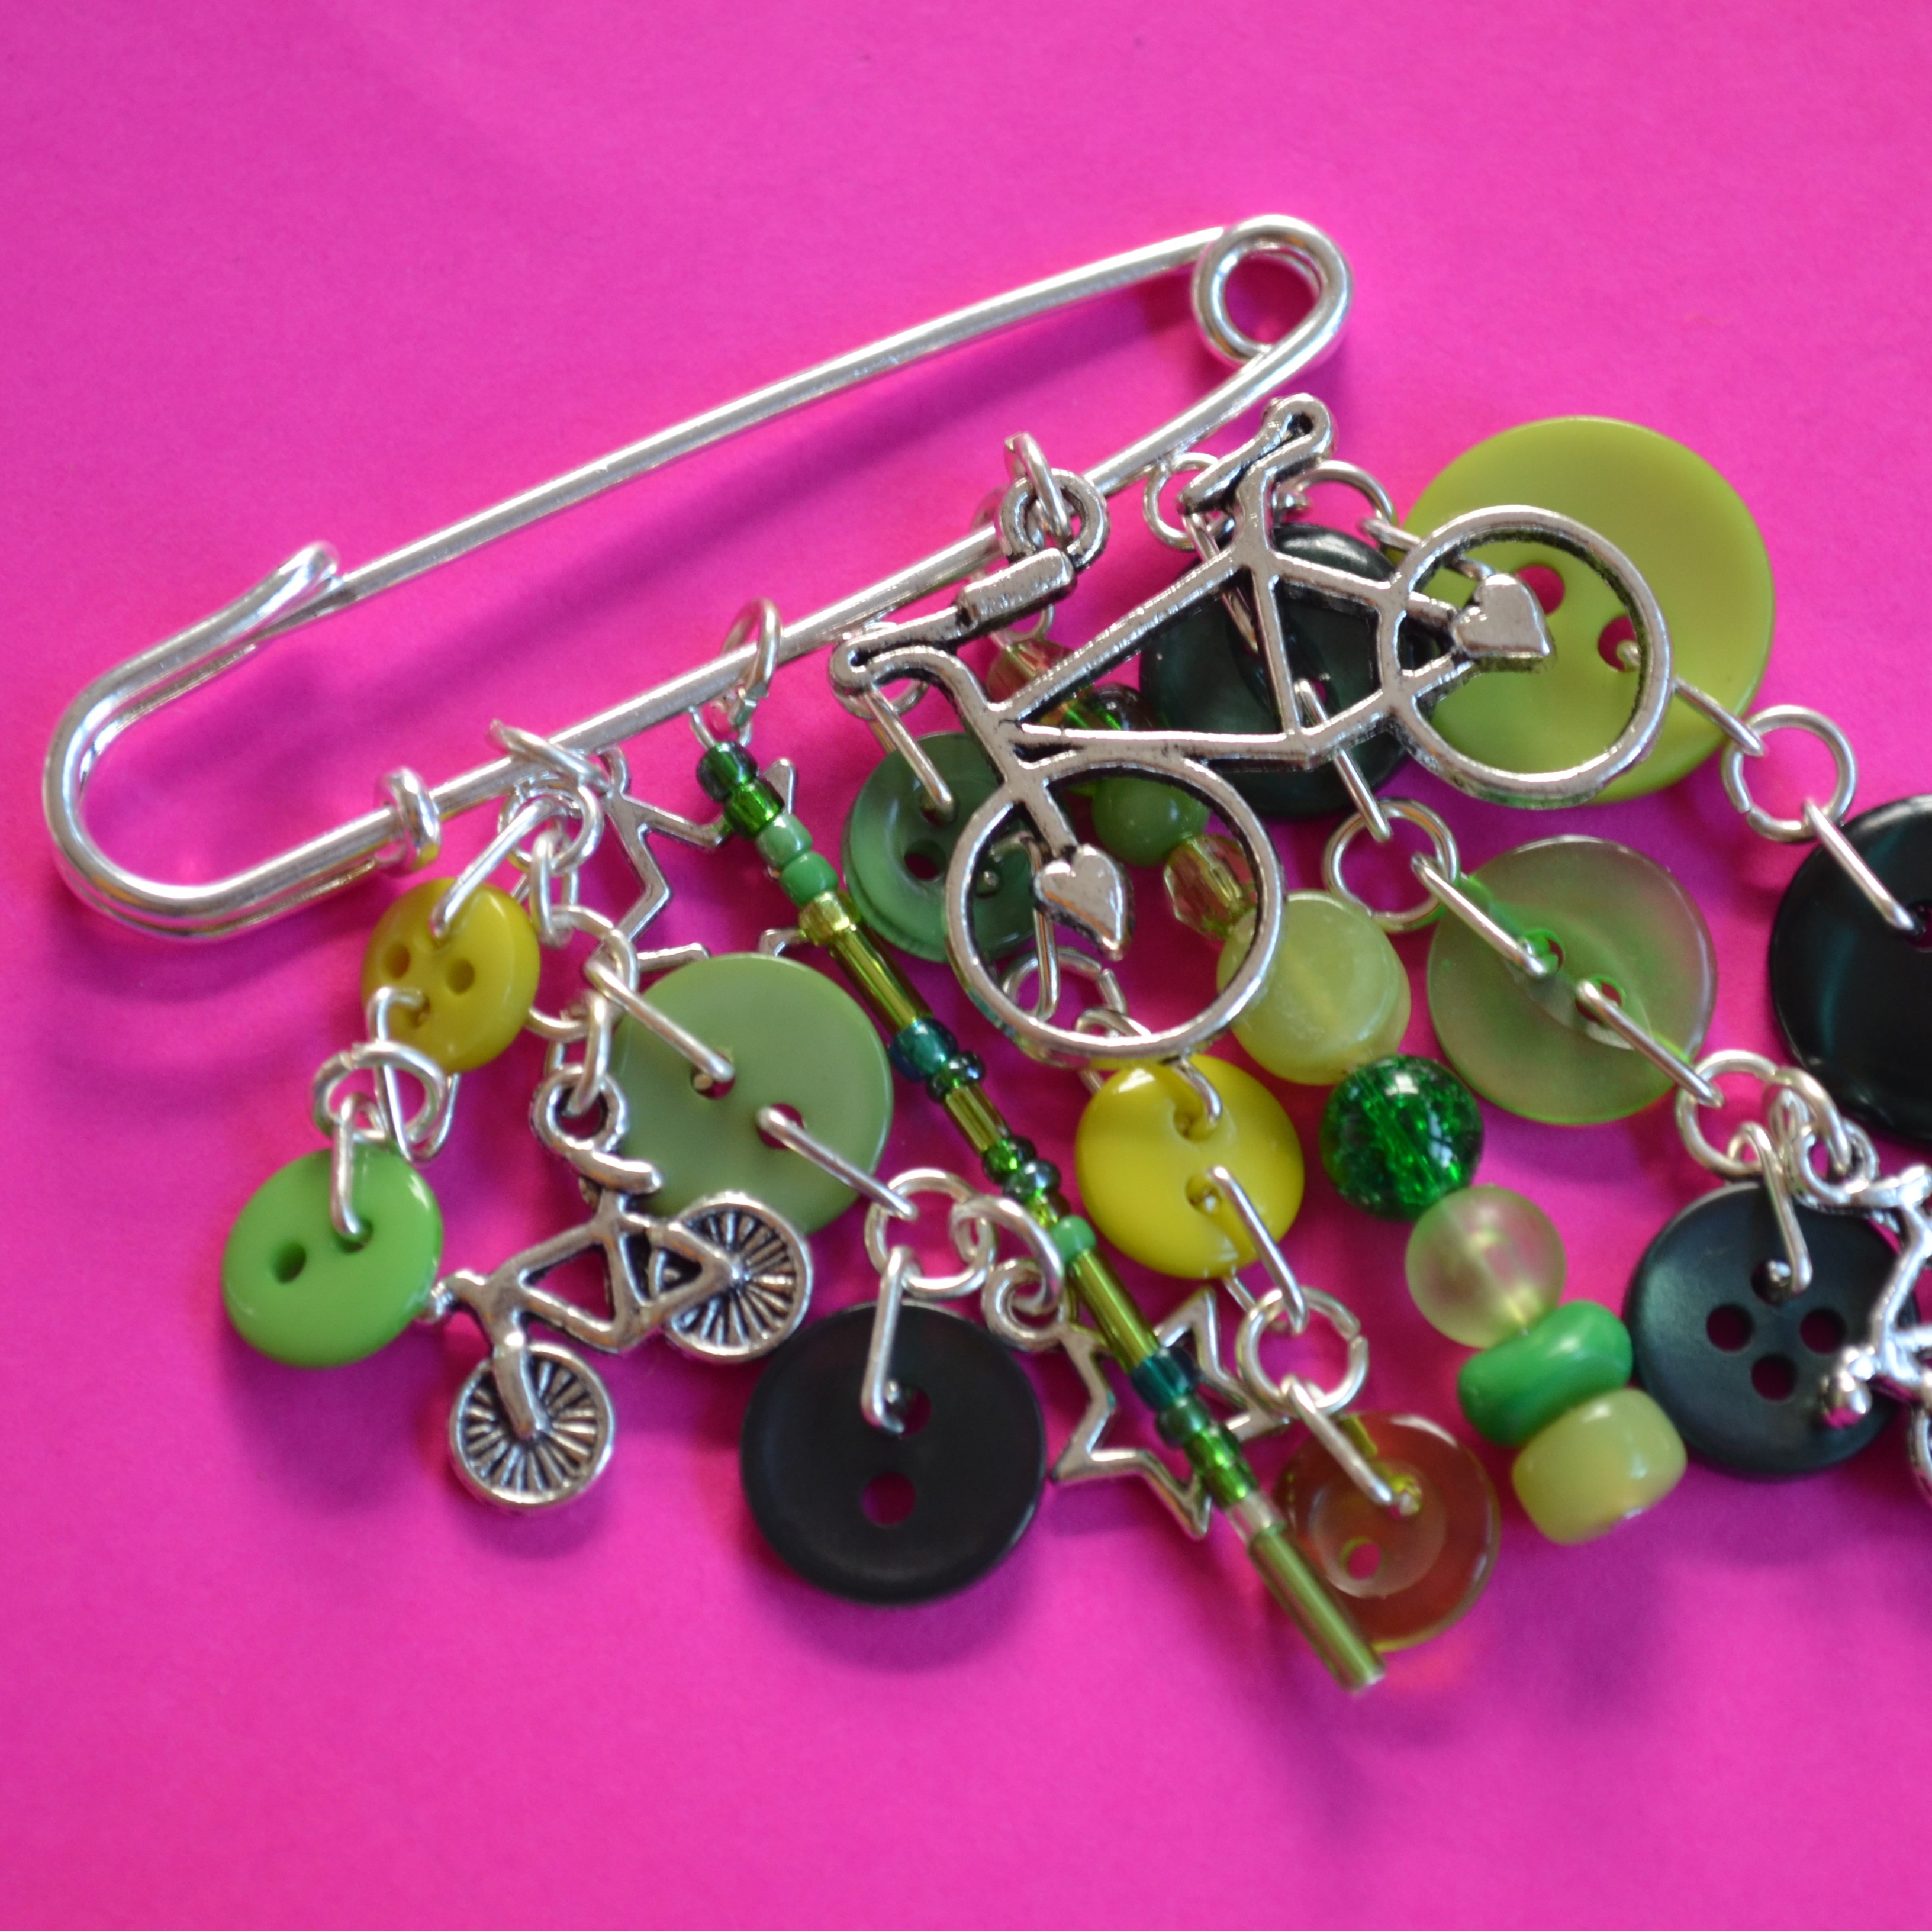 Bicycle Cluster Charm Kilt Pin Brooch